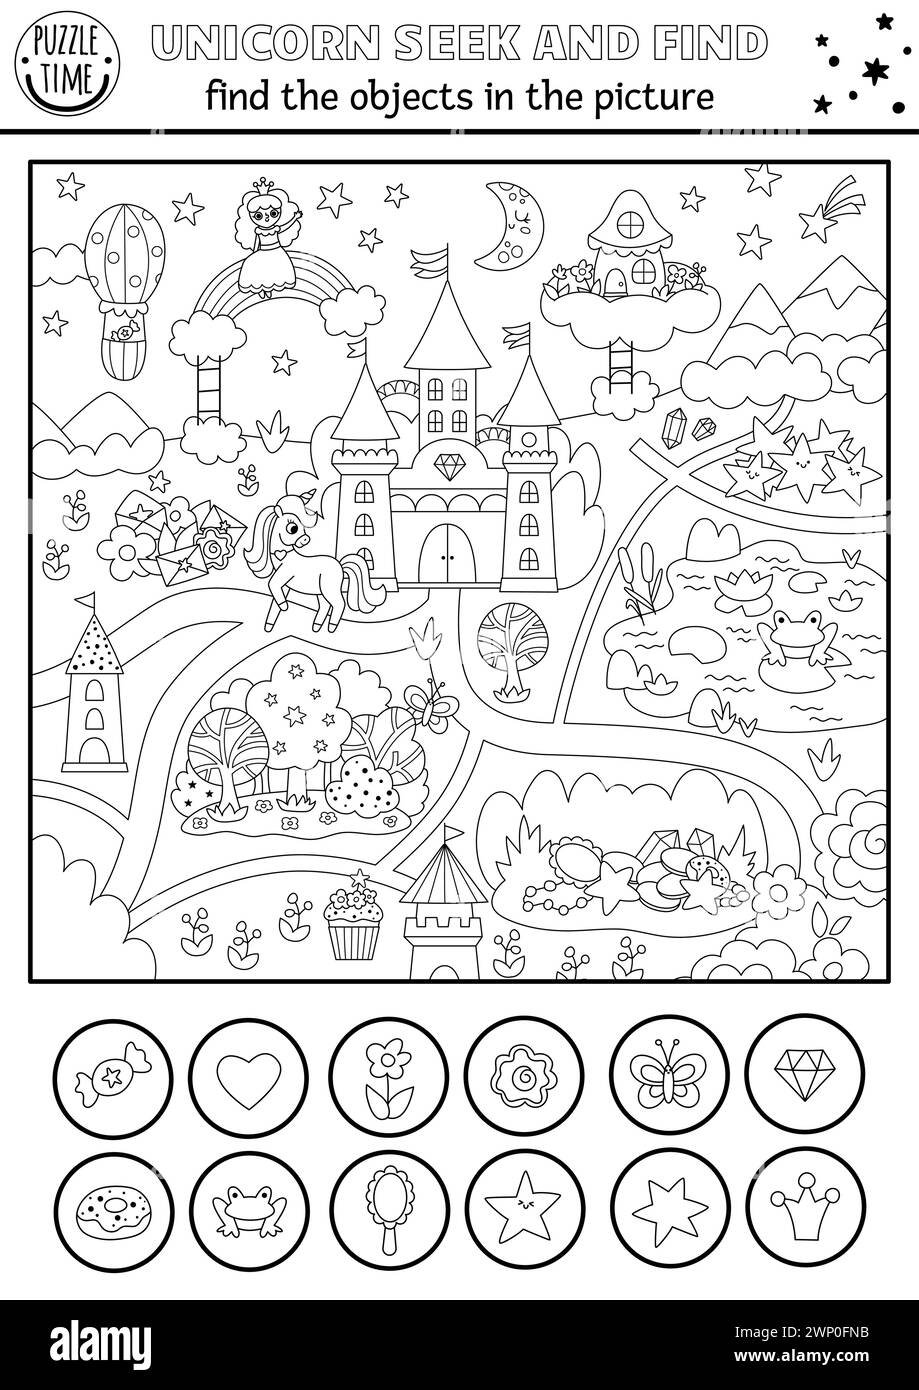 Unicorn vector searching game with magic village landscape. Spot hidden objects. Black and white fairytale world seek and find printable activity or c Stock Vector